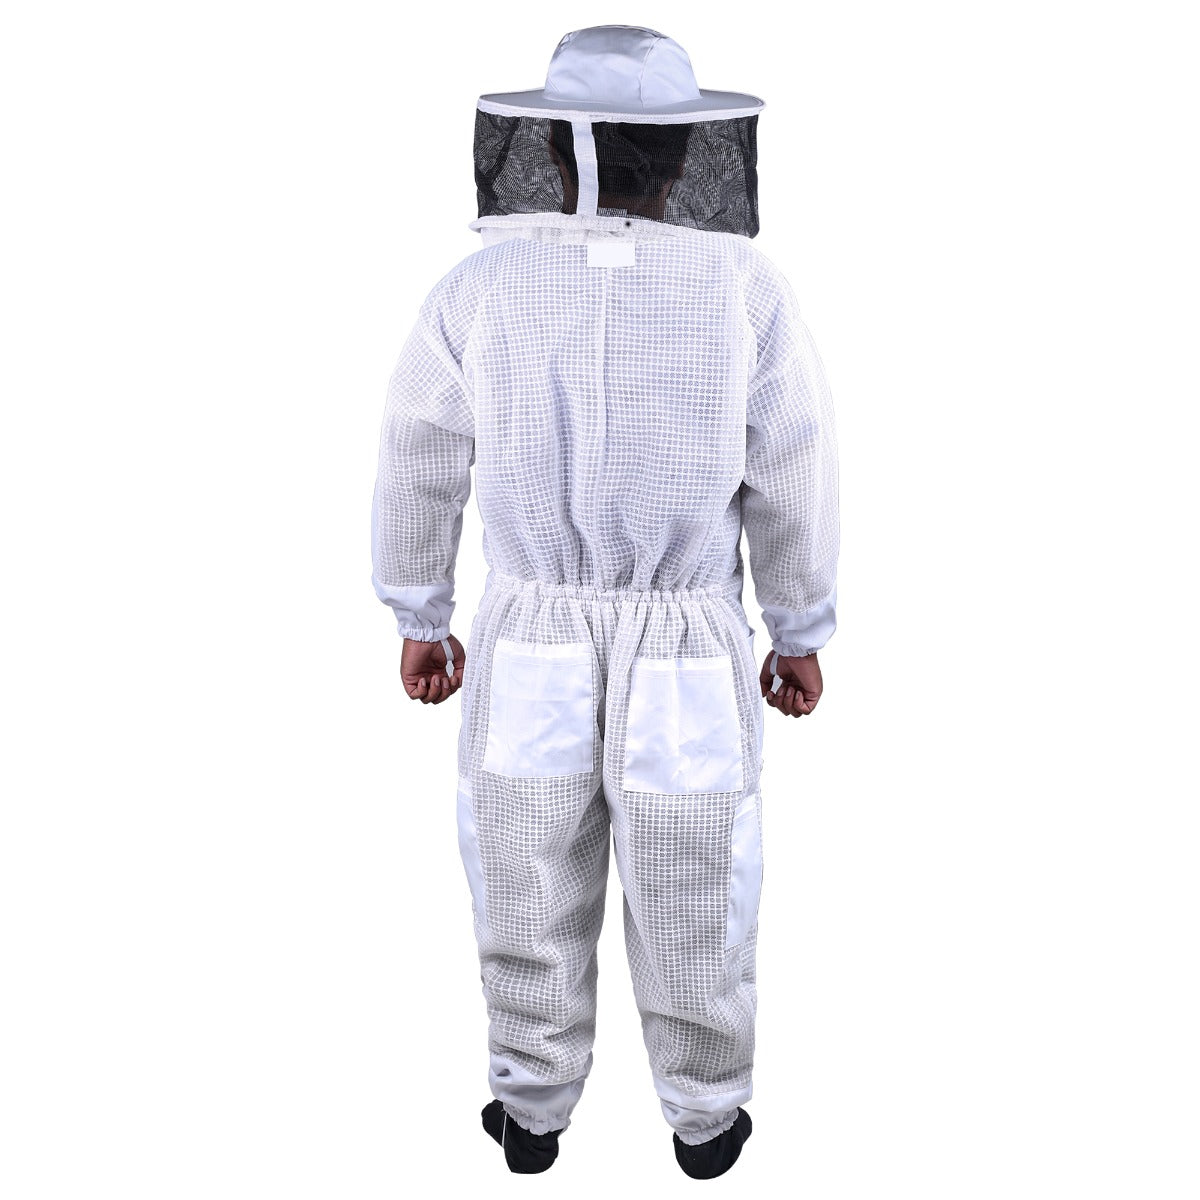 Beekeeping Bee Full Suit 3 Layer Mesh Ultra Cool Ventilated Round Head Beekeeping Protective Gear SIZE M